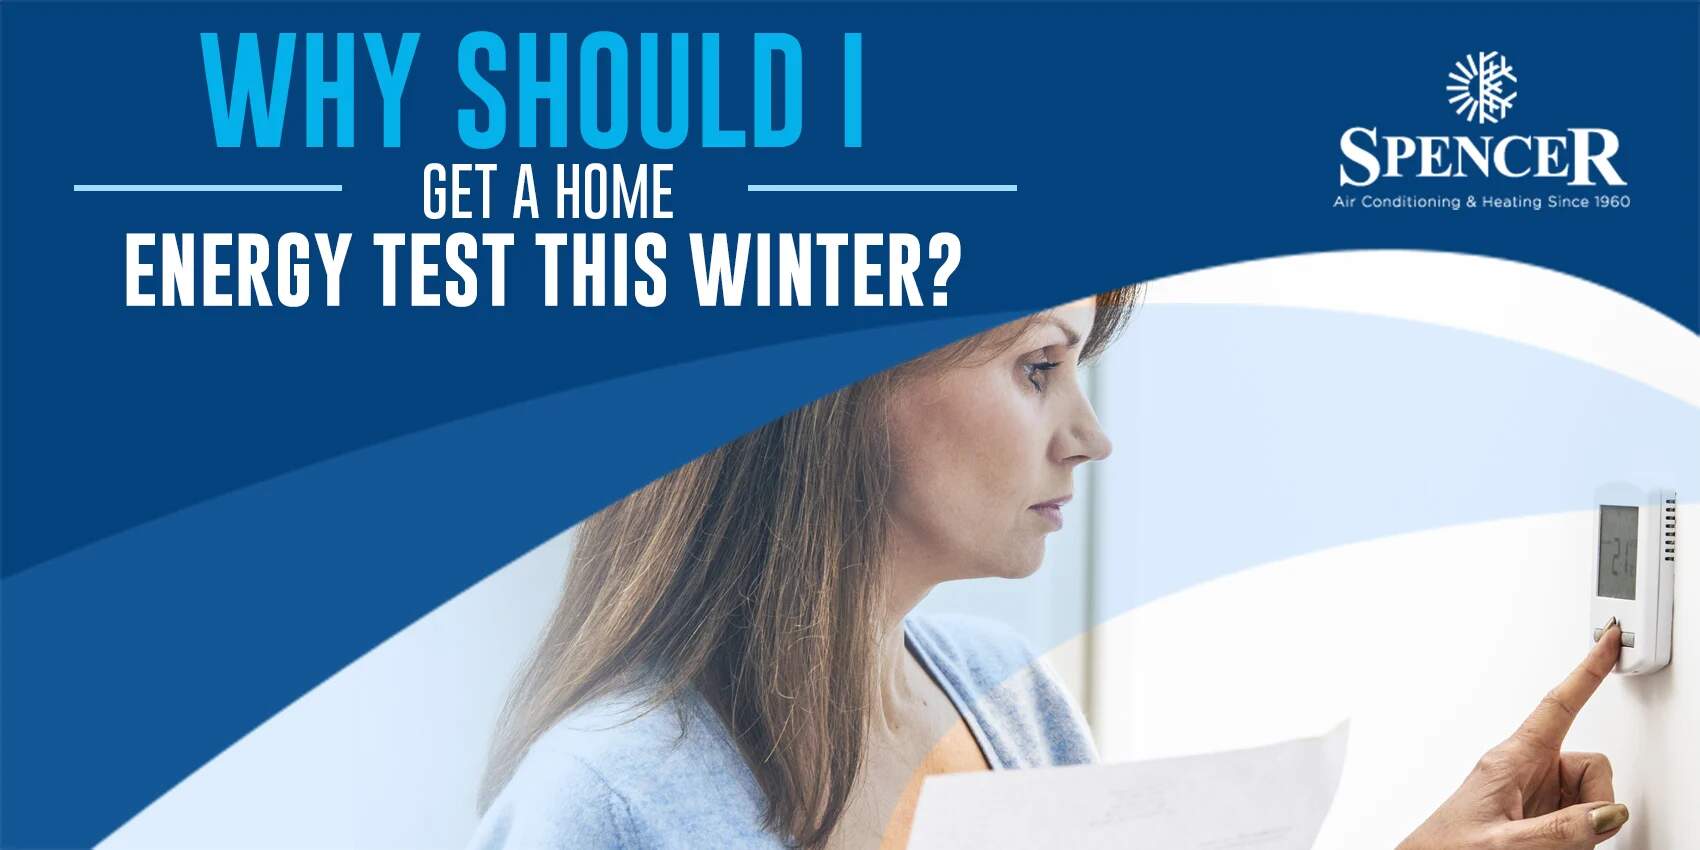 Why Should I Get a Home Energy Test This Winter?